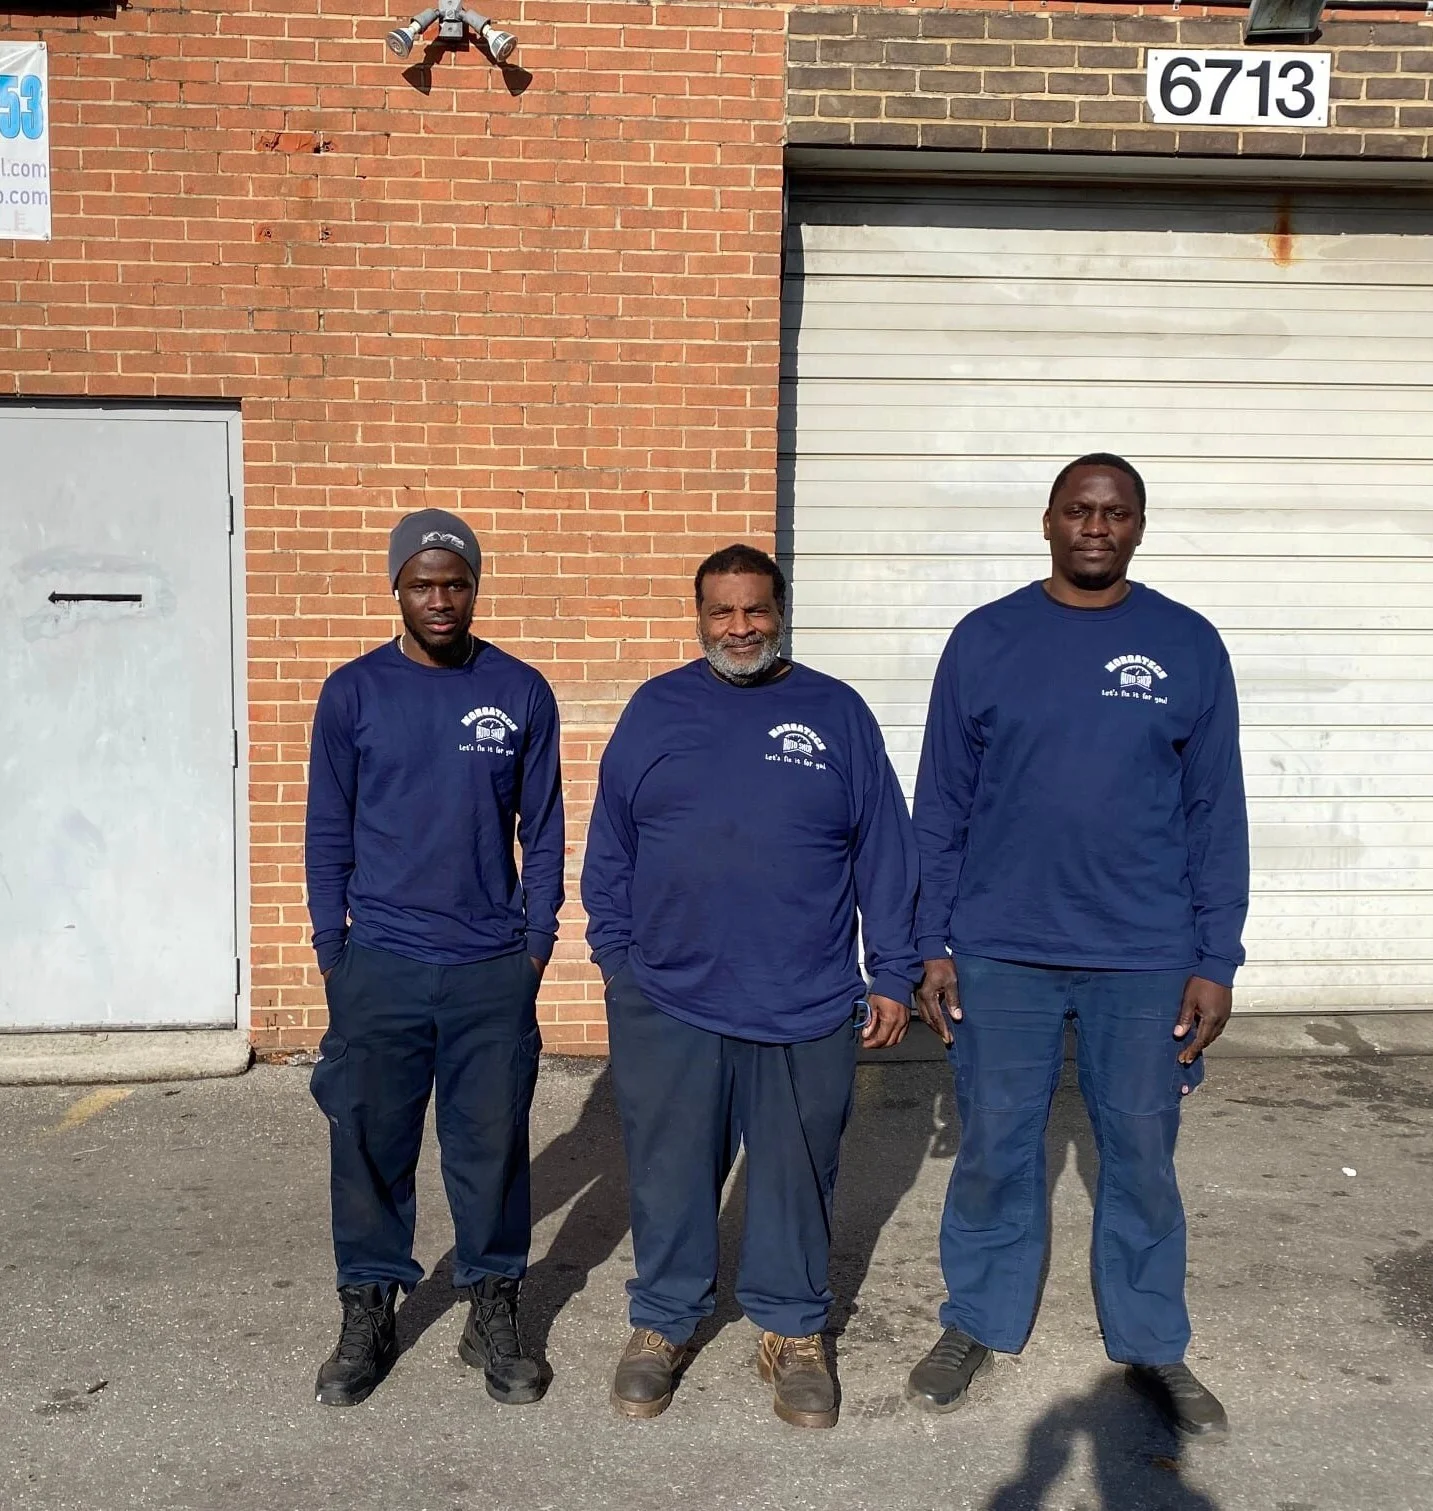 A few of the employees at Morgatech Auto